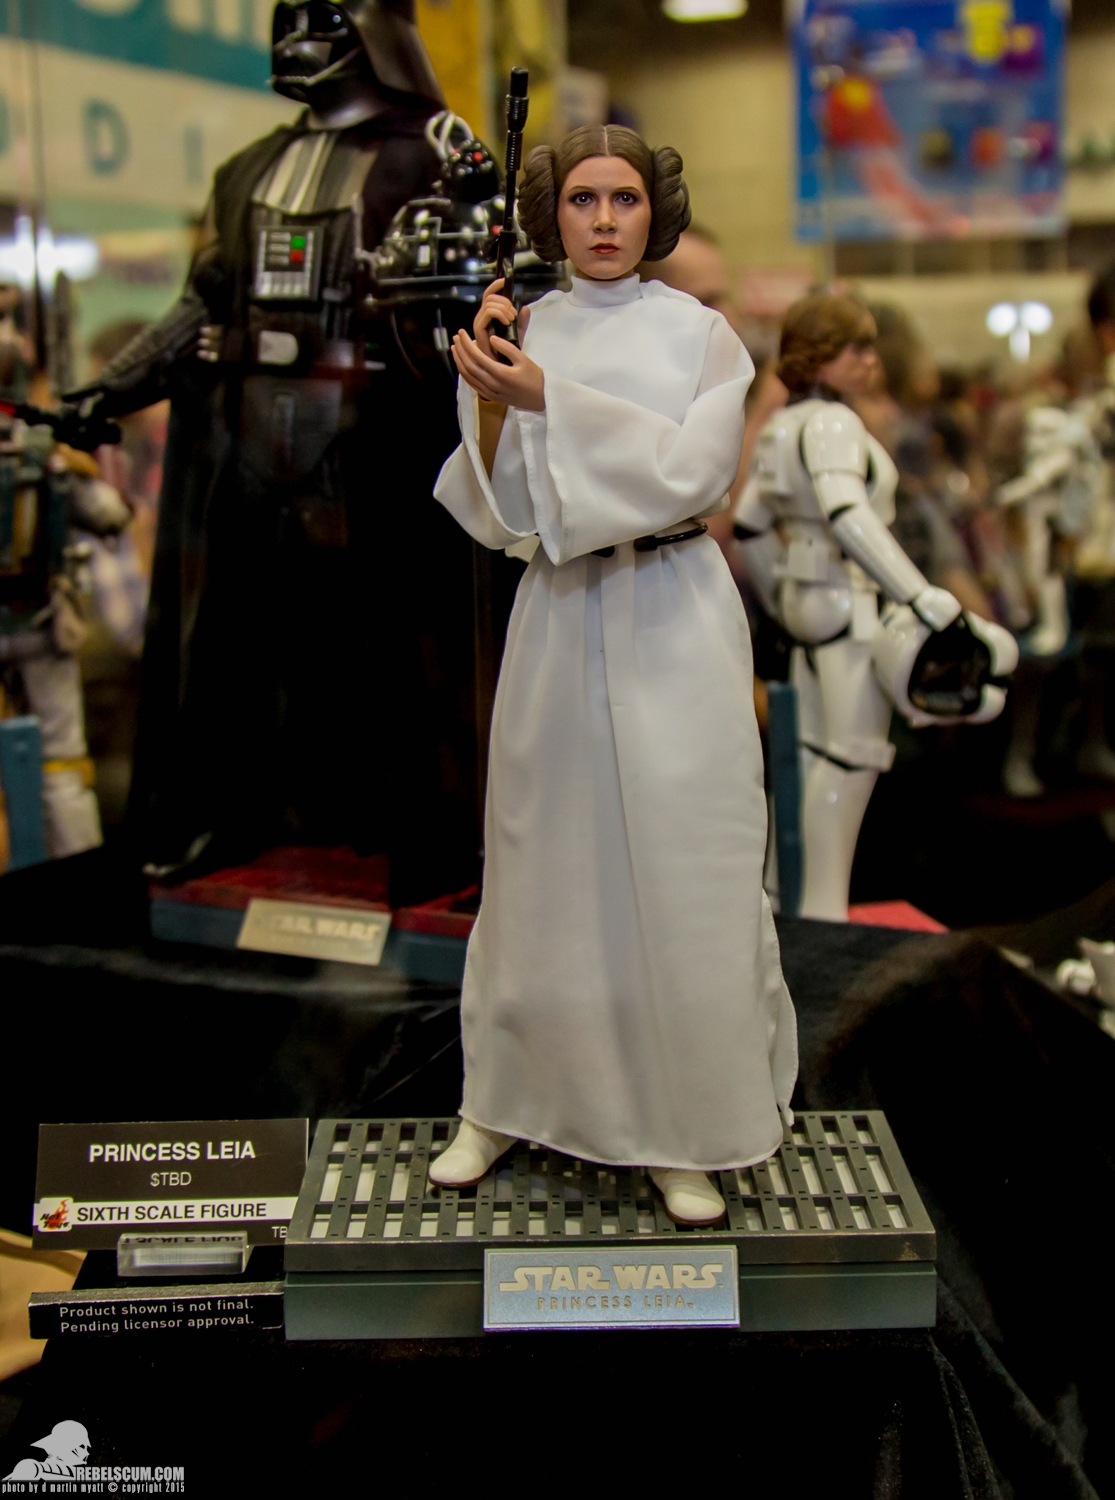 http://www.rebelscum.com/2015-SDCC/Hot-Toys-Display-2015-San-Diego-Comic-Con-SDCC/Hot-Toys-Display-2015-San-Diego-Comic-Con-SDCC-024.jpg